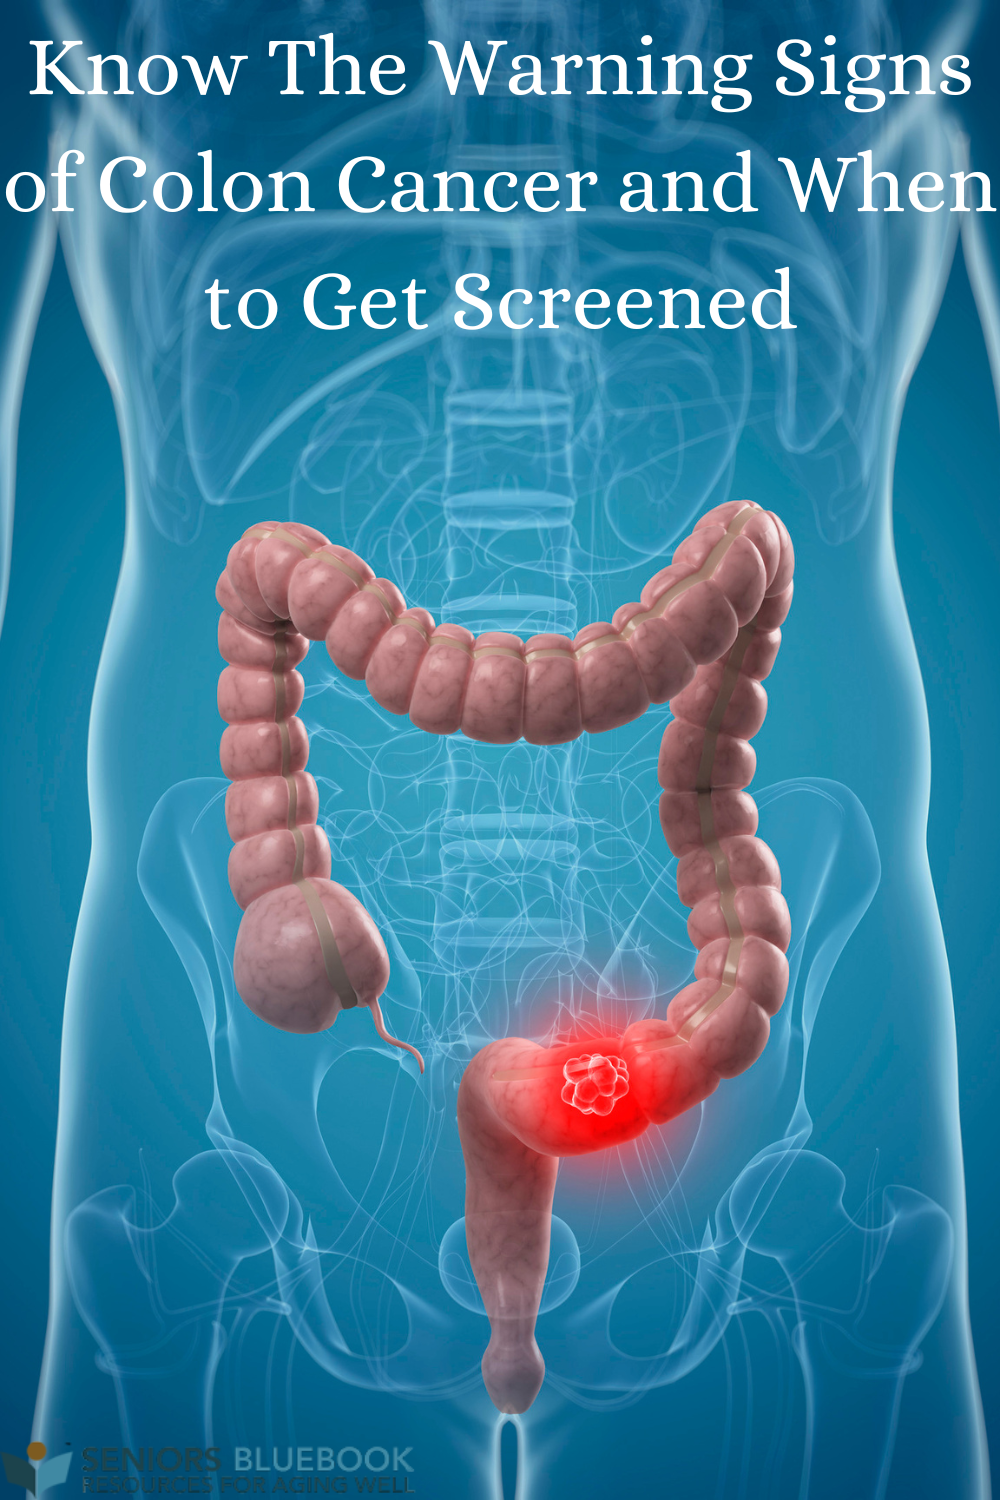 Articles - Know The Warning Signs of Colon Cancer and When to Get ...